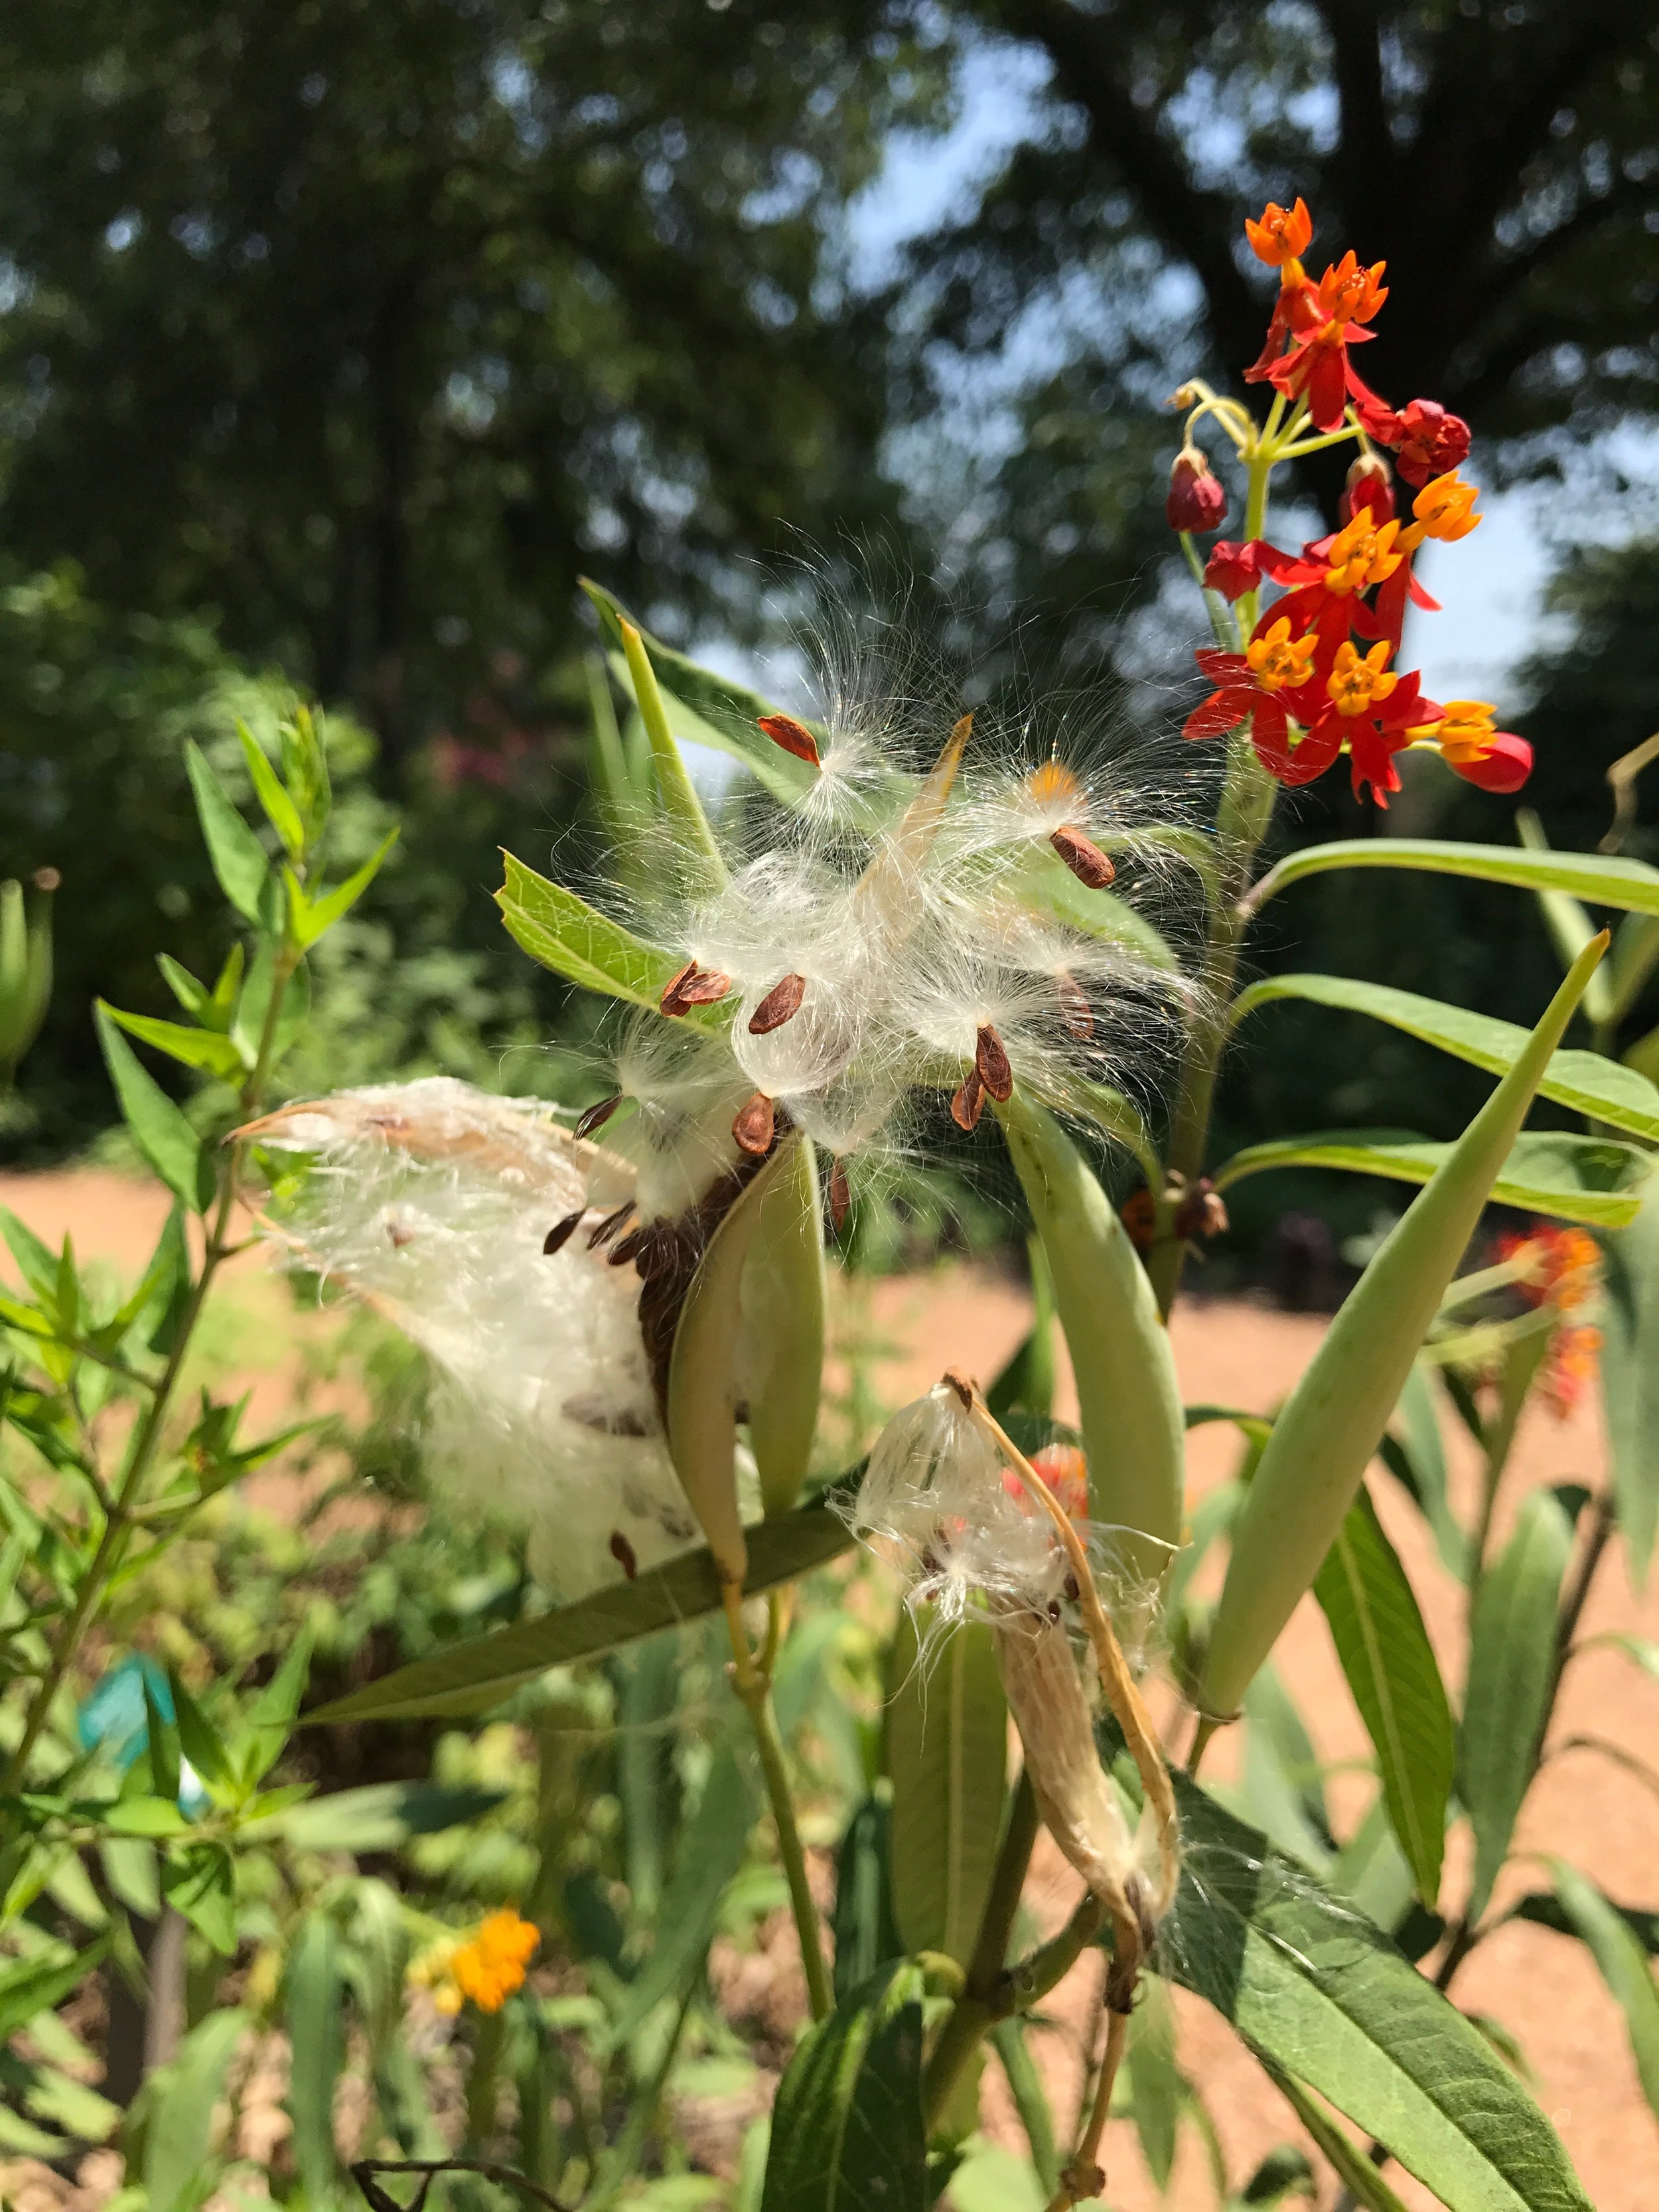 Tropical Milkweed (Asclepias curassavica) with flowers and seed pods.